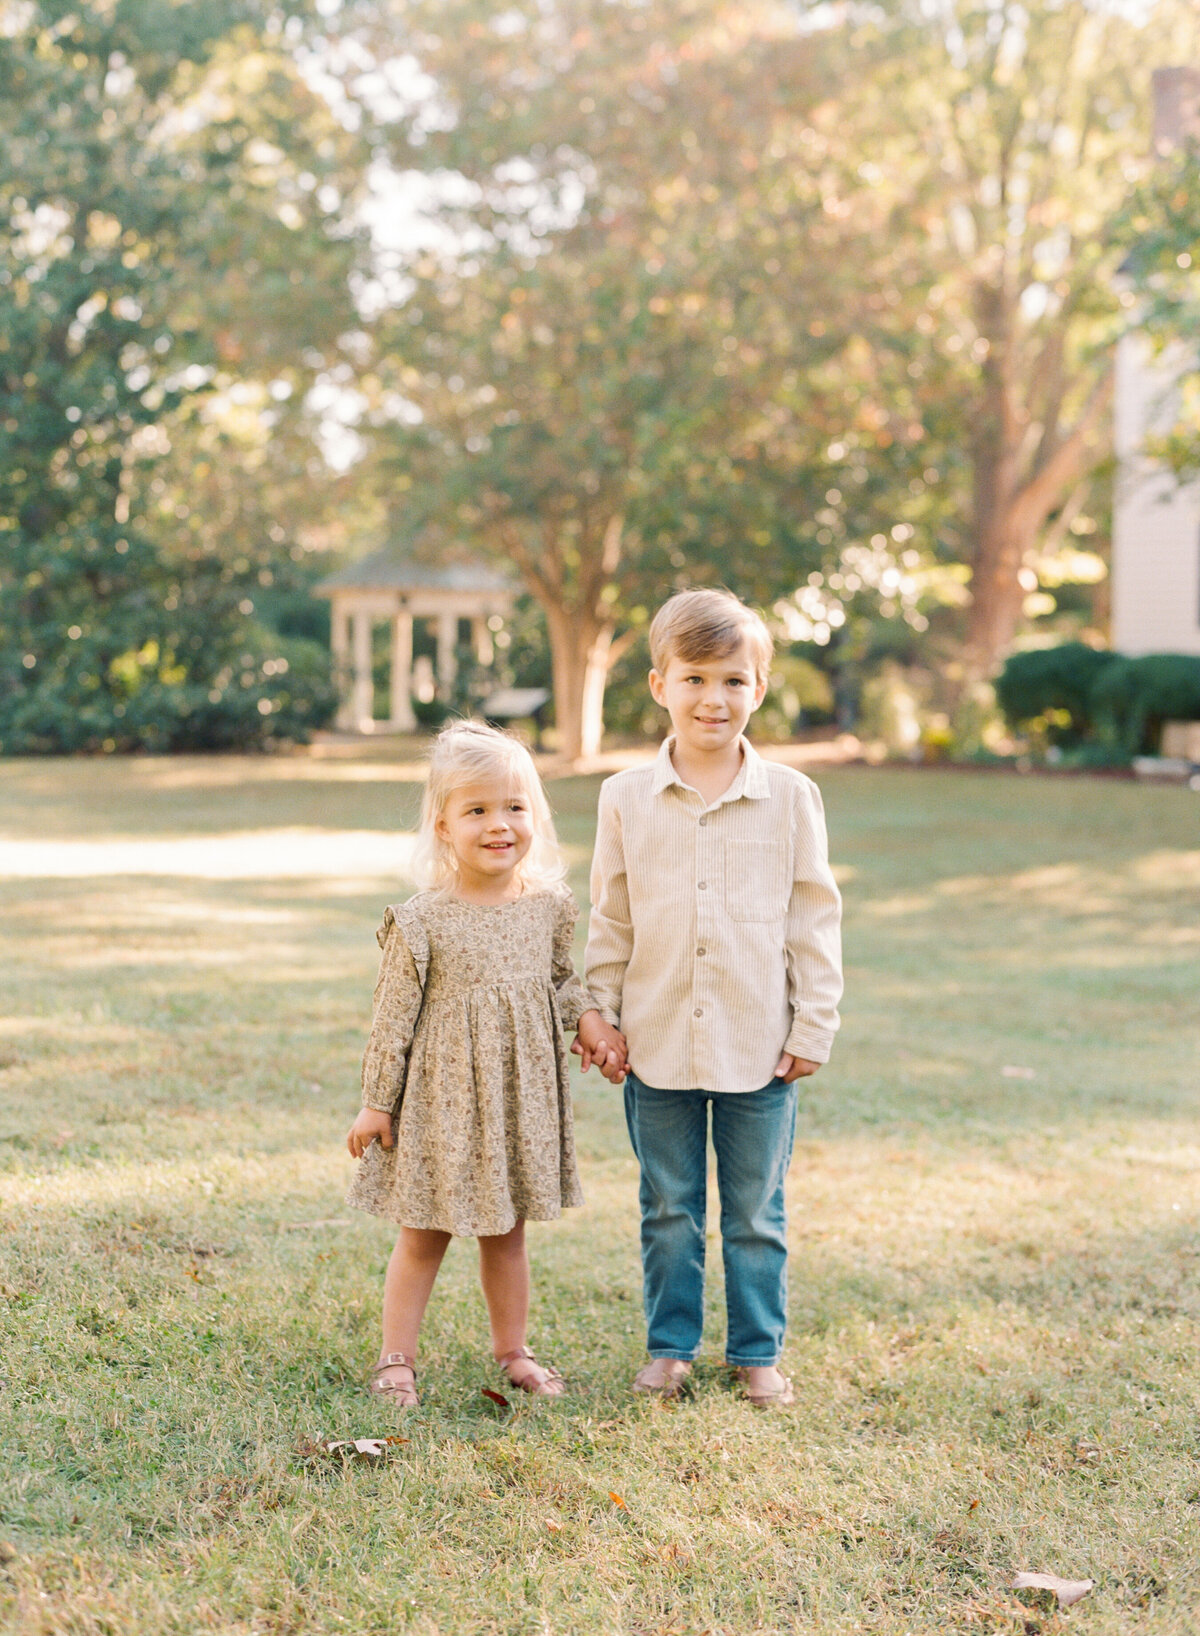 Siblings smile during their fall family photos in Raleigh NC. Family walking during their family portrait session in Wake Forest, NC. Photographed by Raleigh family photographer A.J. Dunlap Photography.